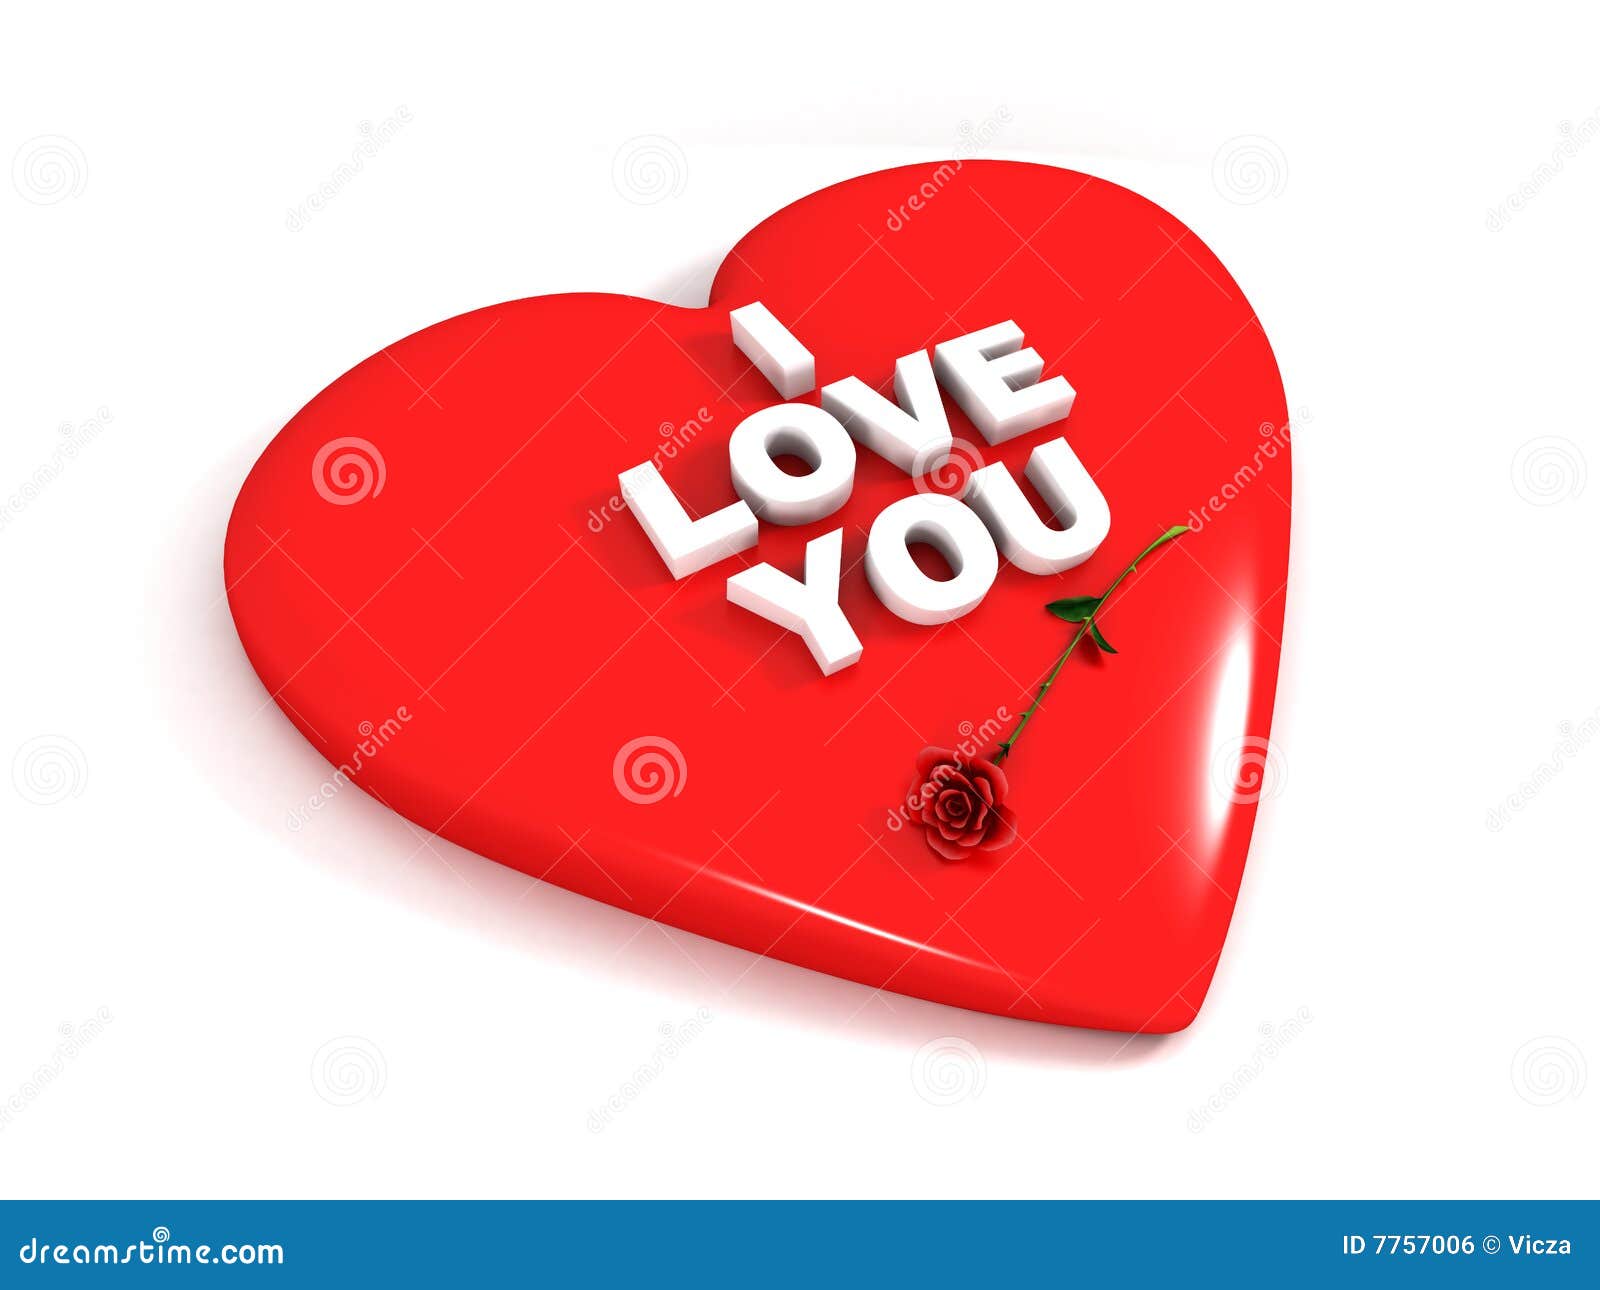 I Love you and rose stock illustration. Illustration of heart ...